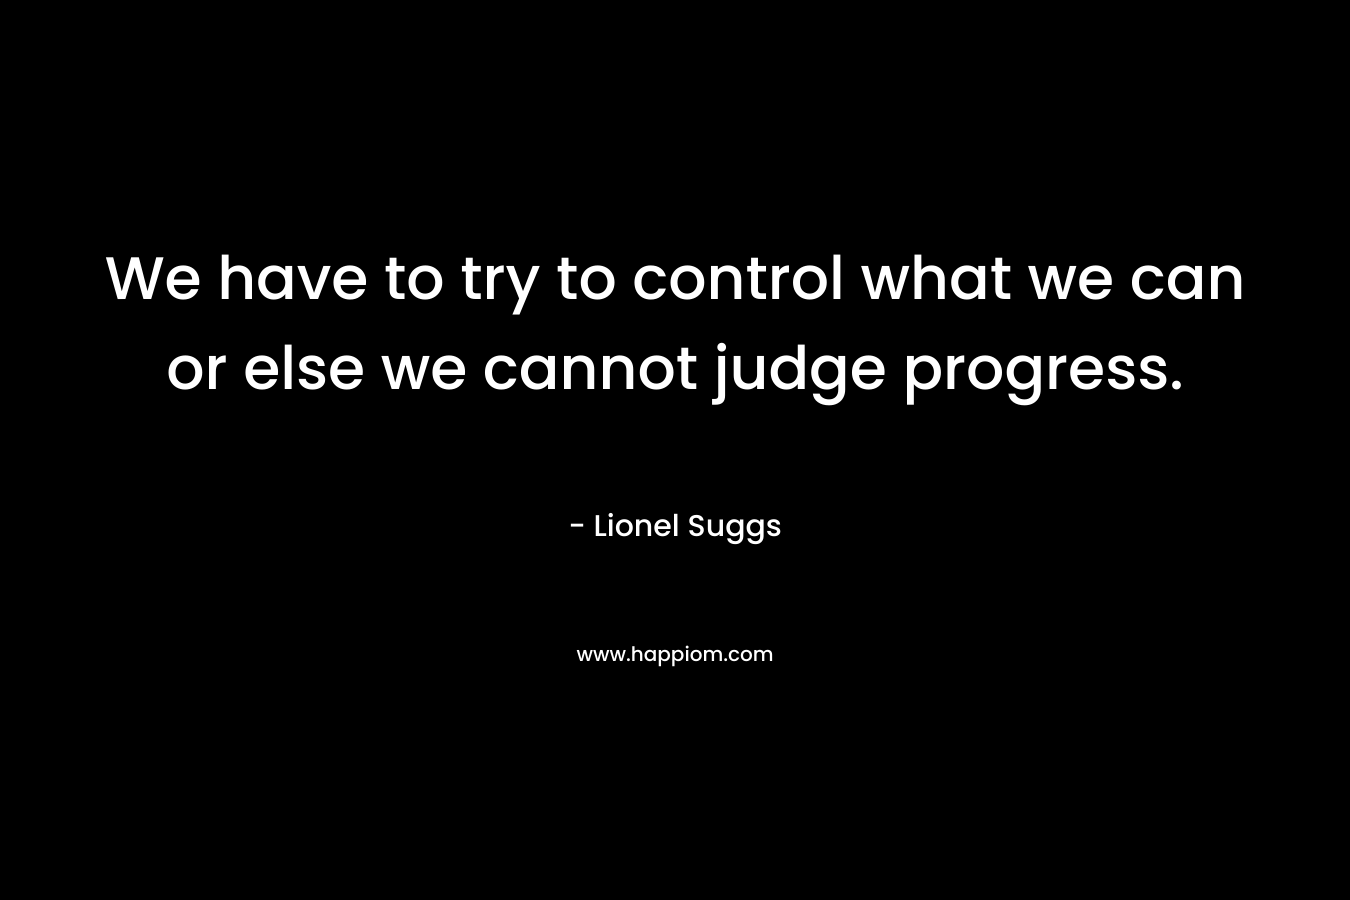 We have to try to control what we can or else we cannot judge progress.